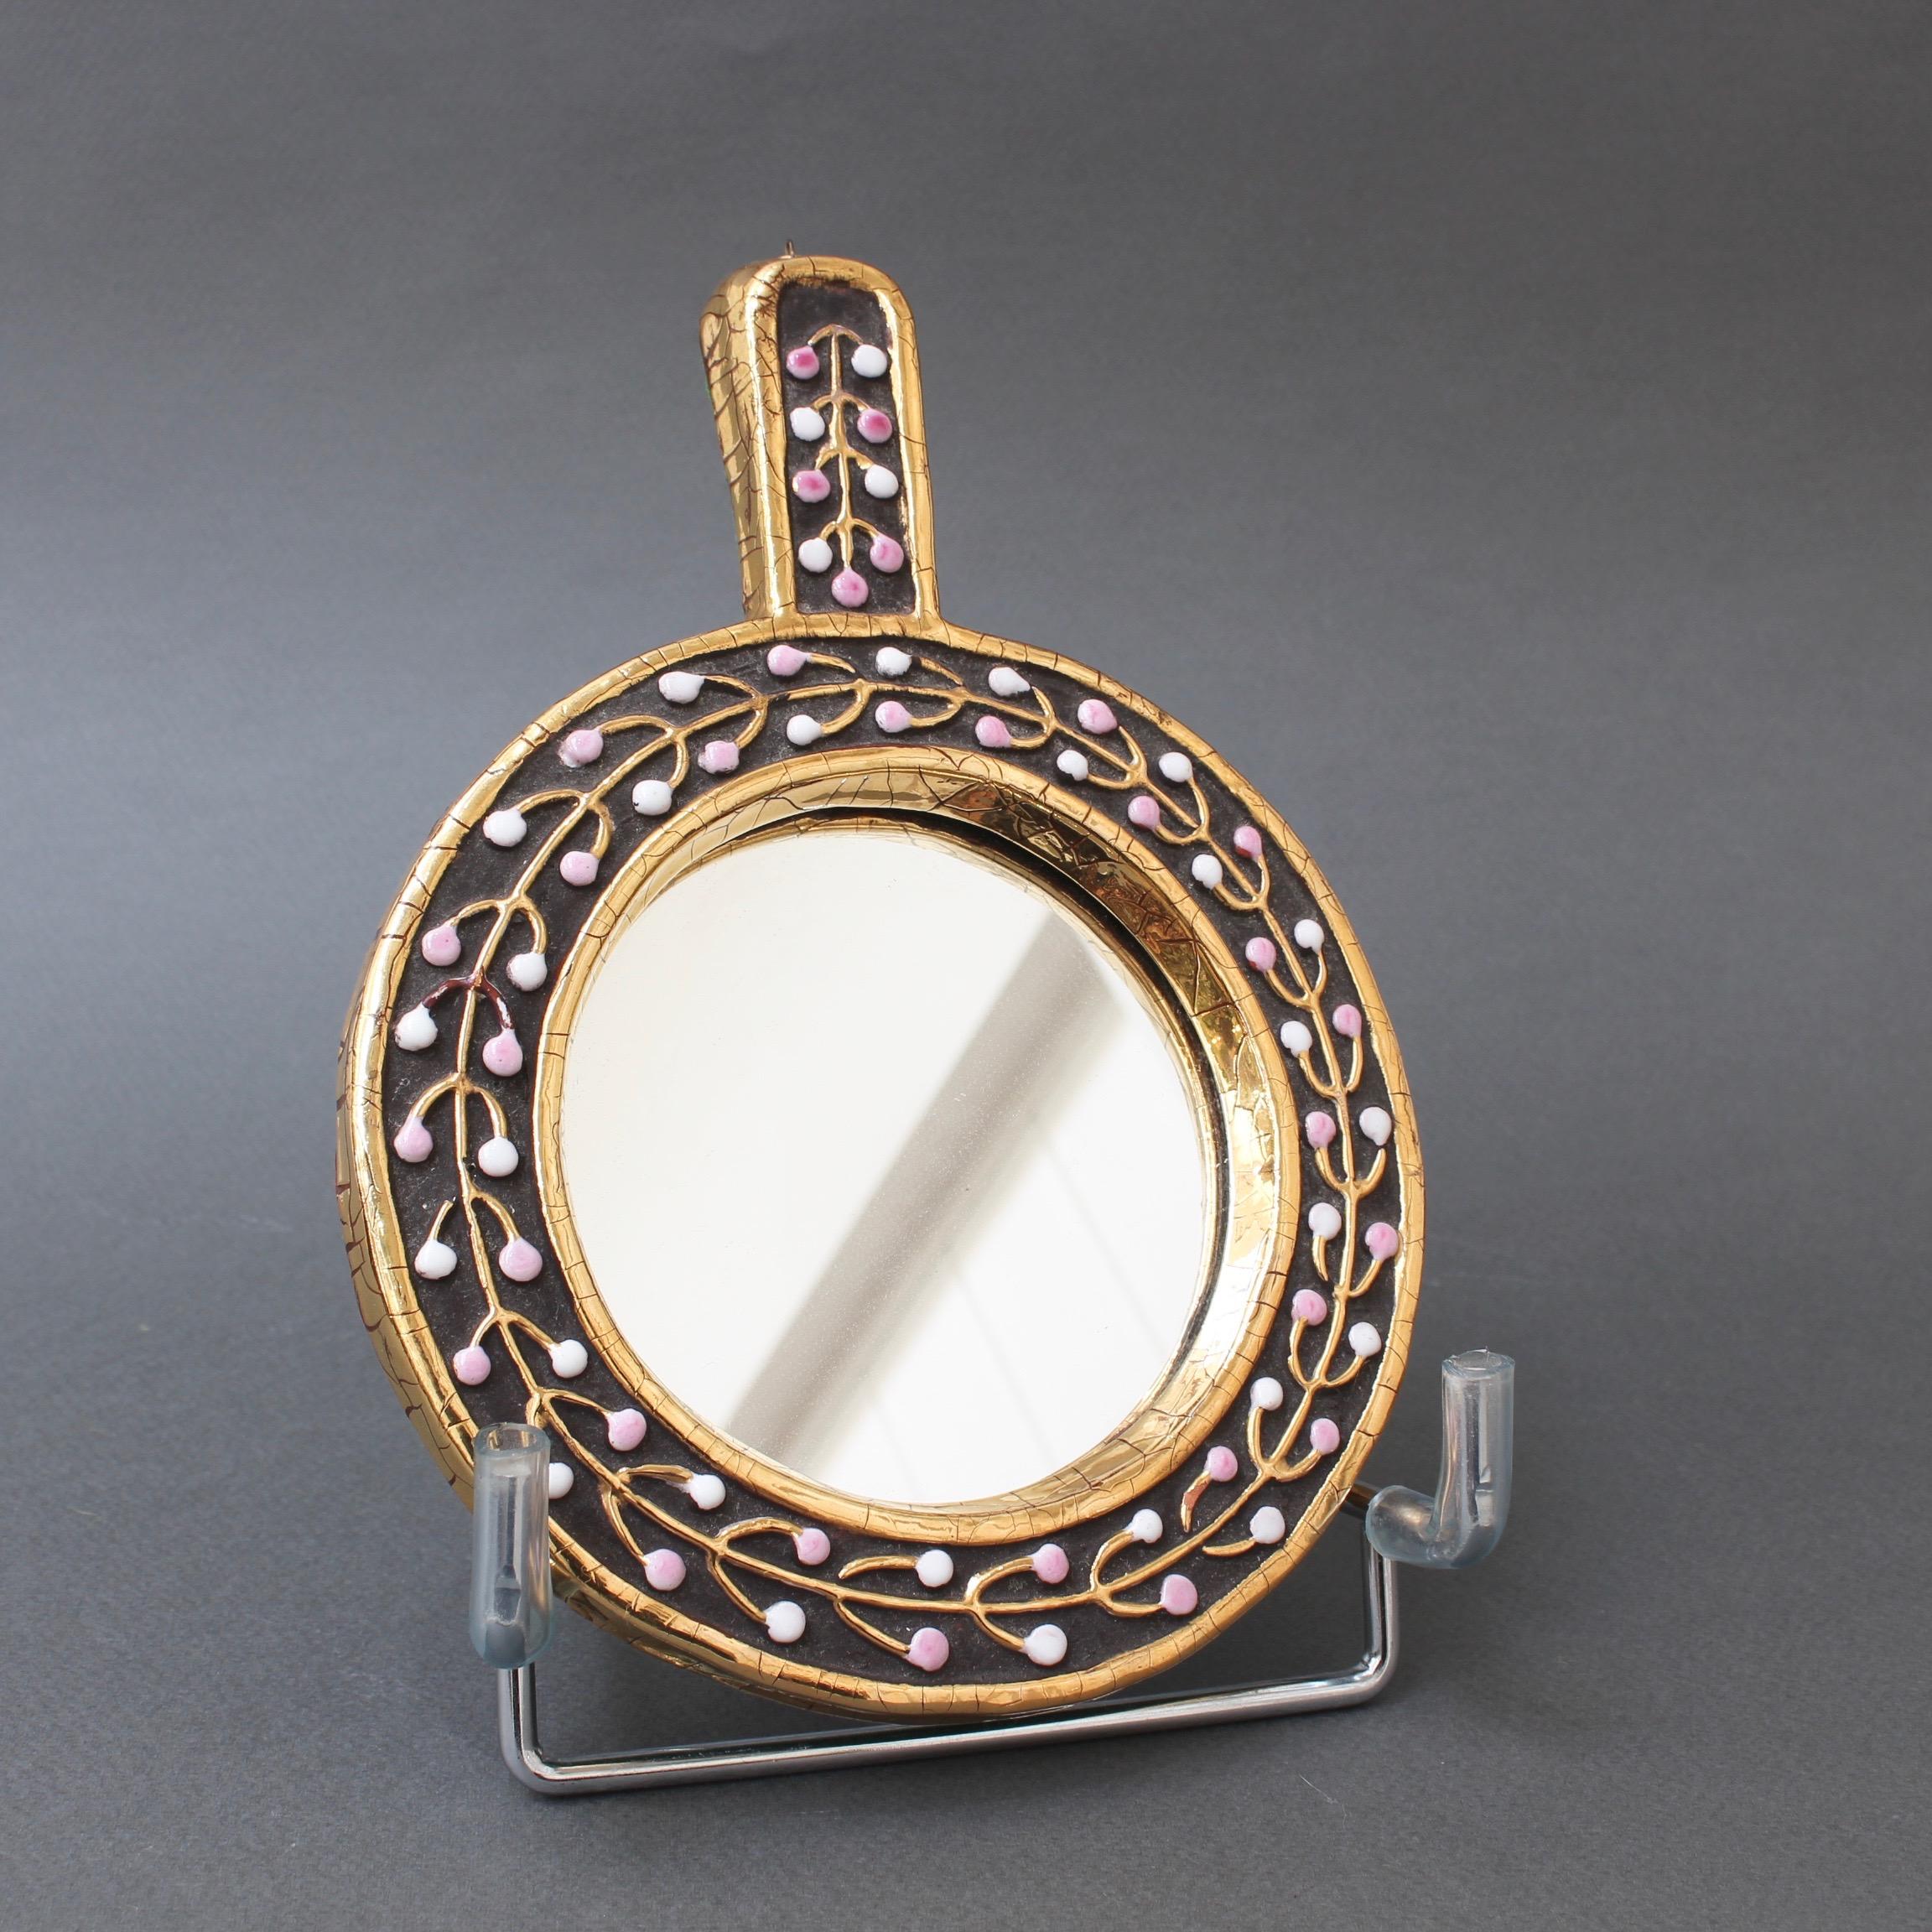 Ceramic hand mirror with flower bud motif by Mithé Espelt, circa 1960s. An elegant piece of decorative art consisting of a lustrous gold craquelure outer and inner frame. Between the craquelure is chocolate-brown ceramic with a gold flower bud motif